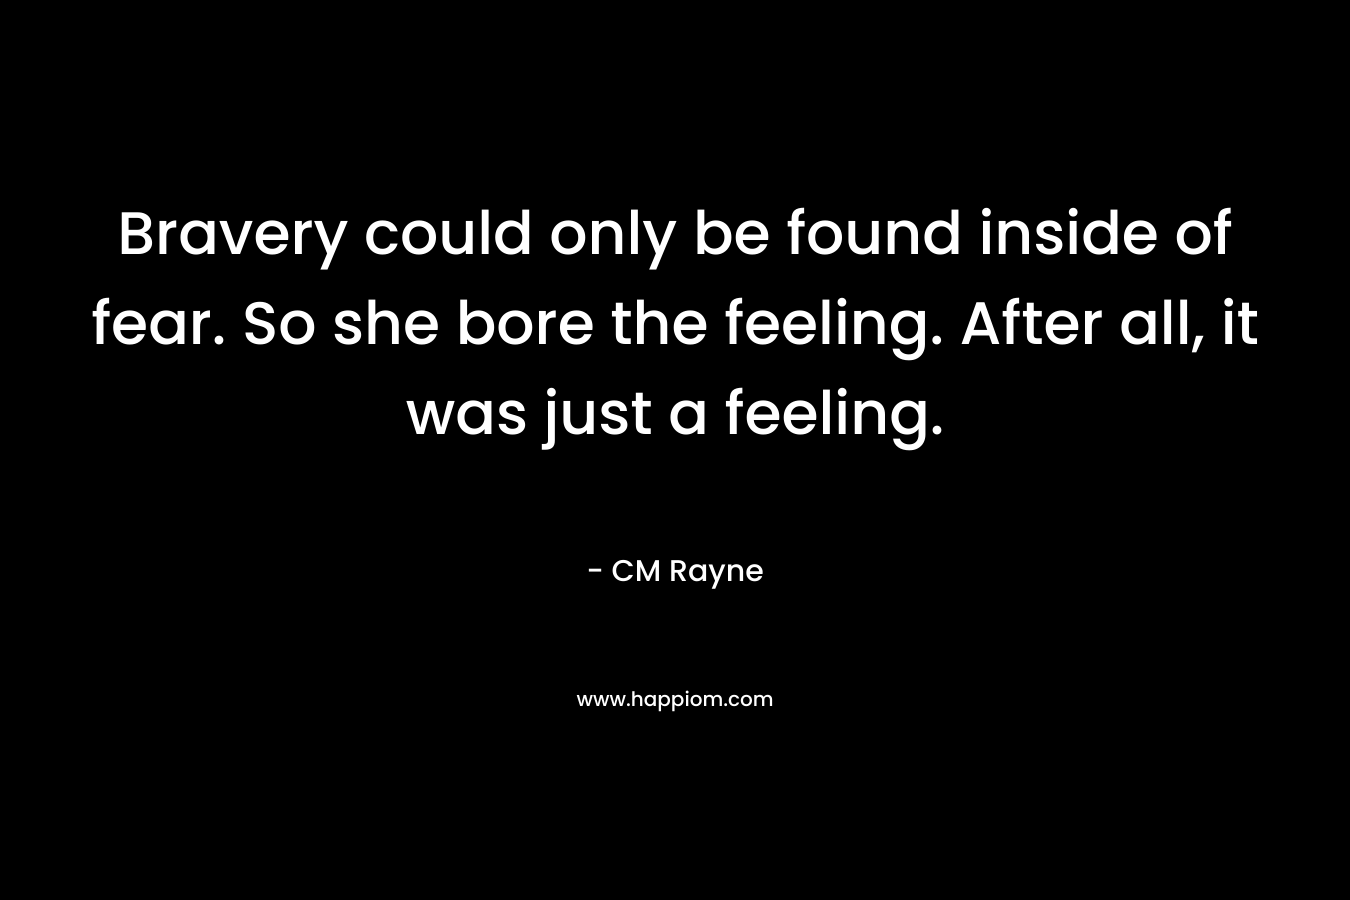 Bravery could only be found inside of fear. So she bore the feeling. After all, it was just a feeling. – CM Rayne